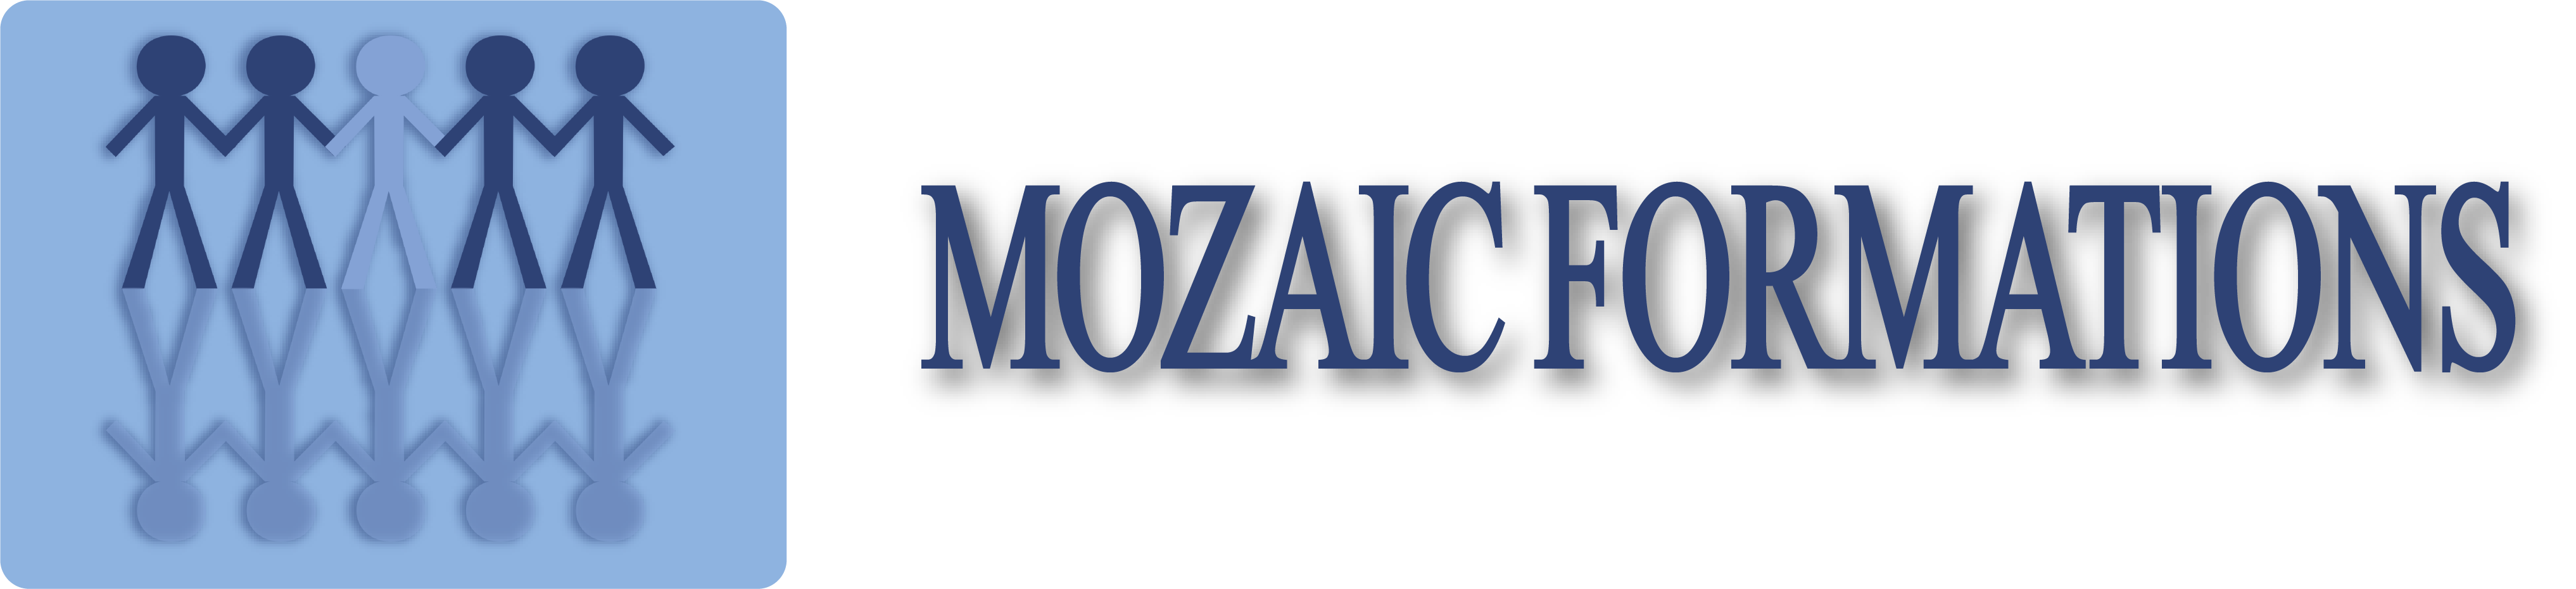 Mozaic Formations